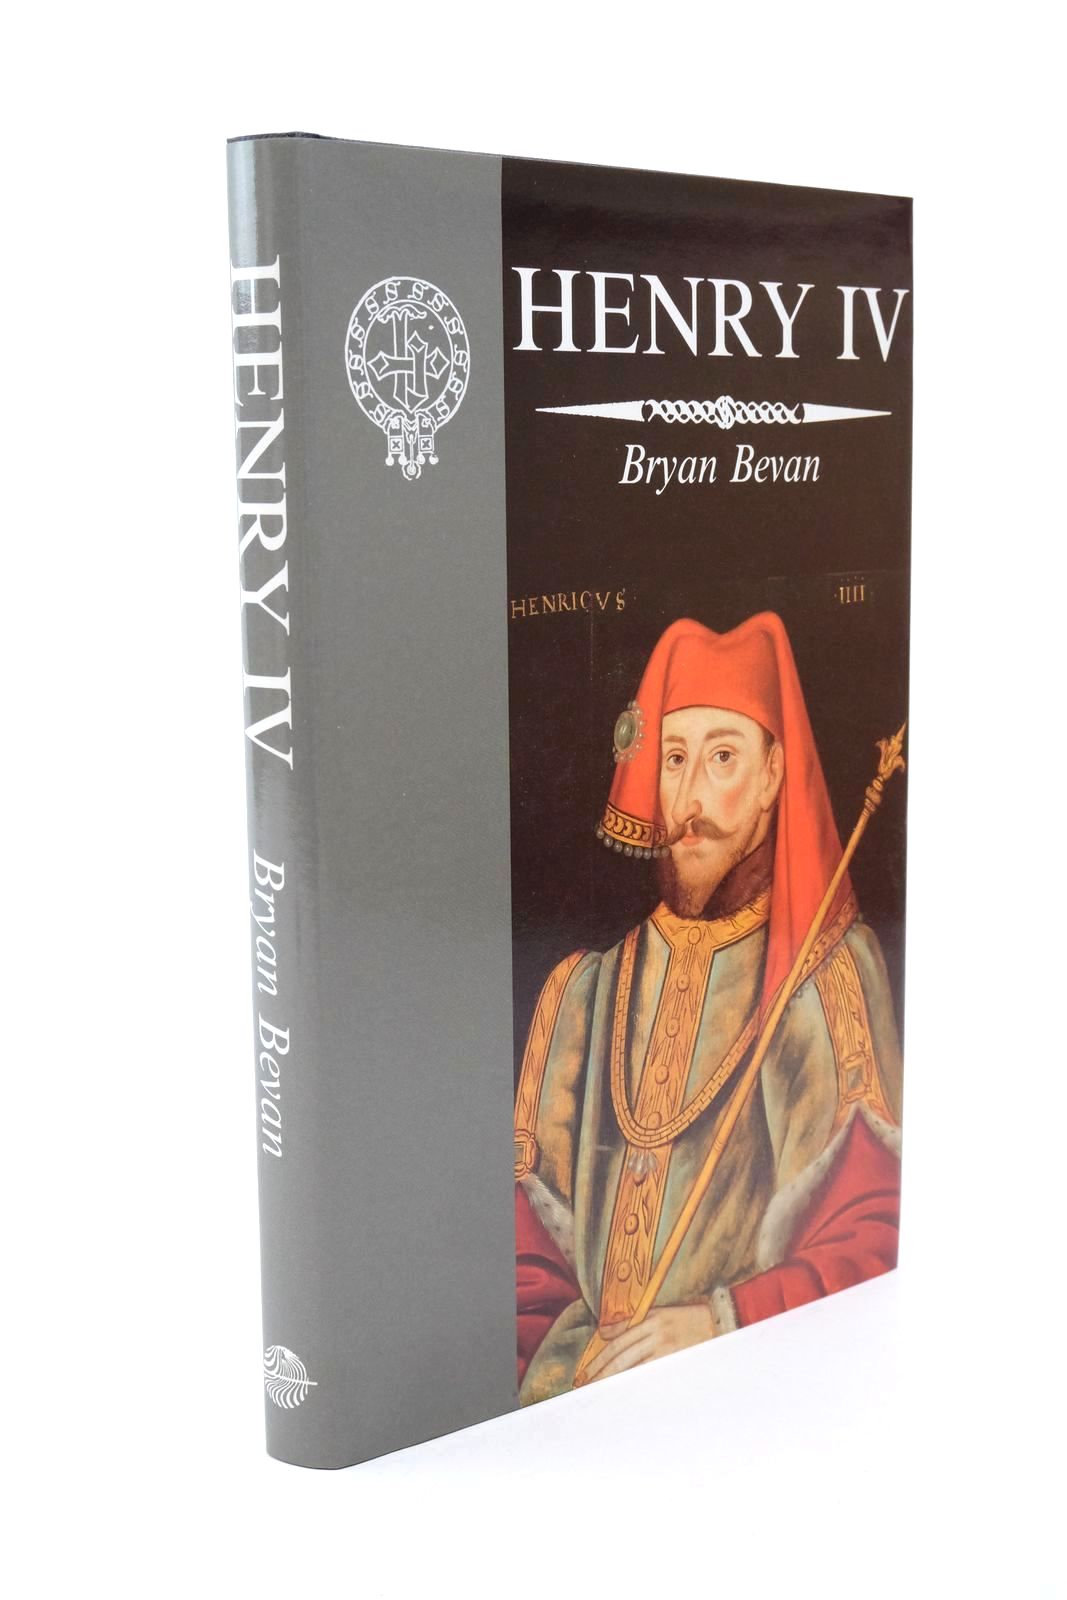 Photo of HENRY IV written by Bevan, Bryan published by The Rubicon Press (STOCK CODE: 1322607)  for sale by Stella & Rose's Books